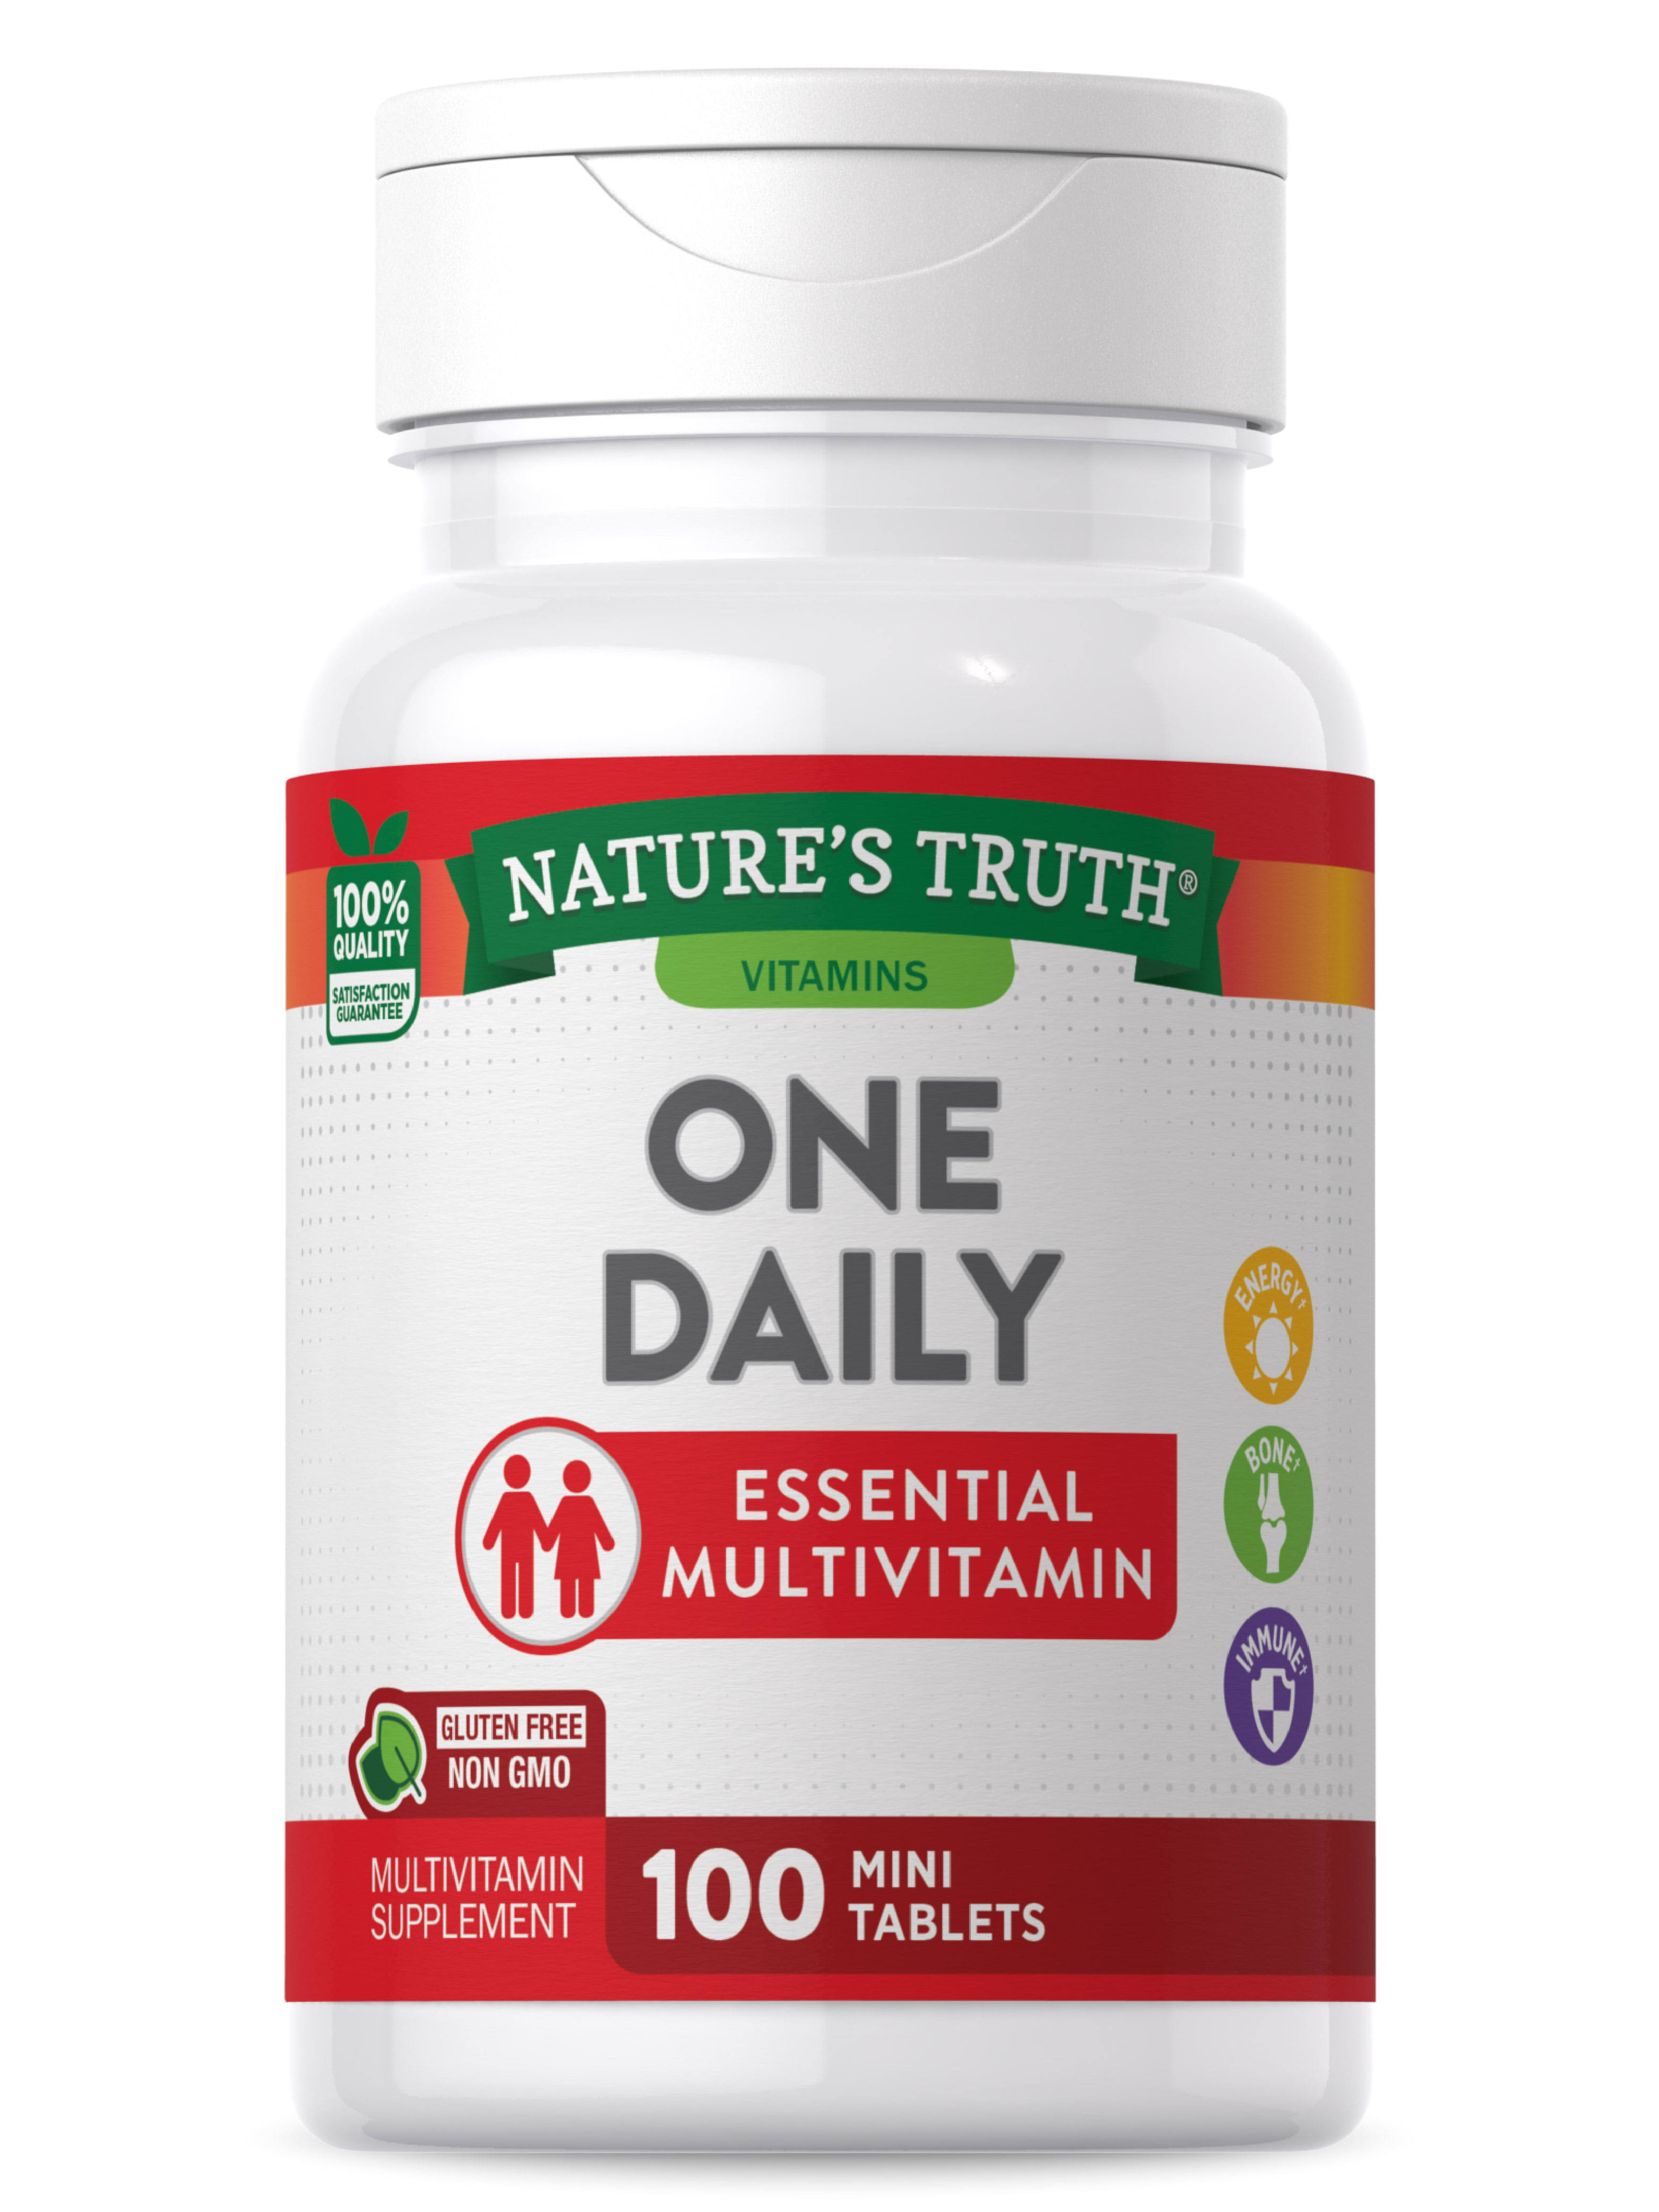 One Daily Essential Multivitamin - 100 Tablets - Nature's Truth UK